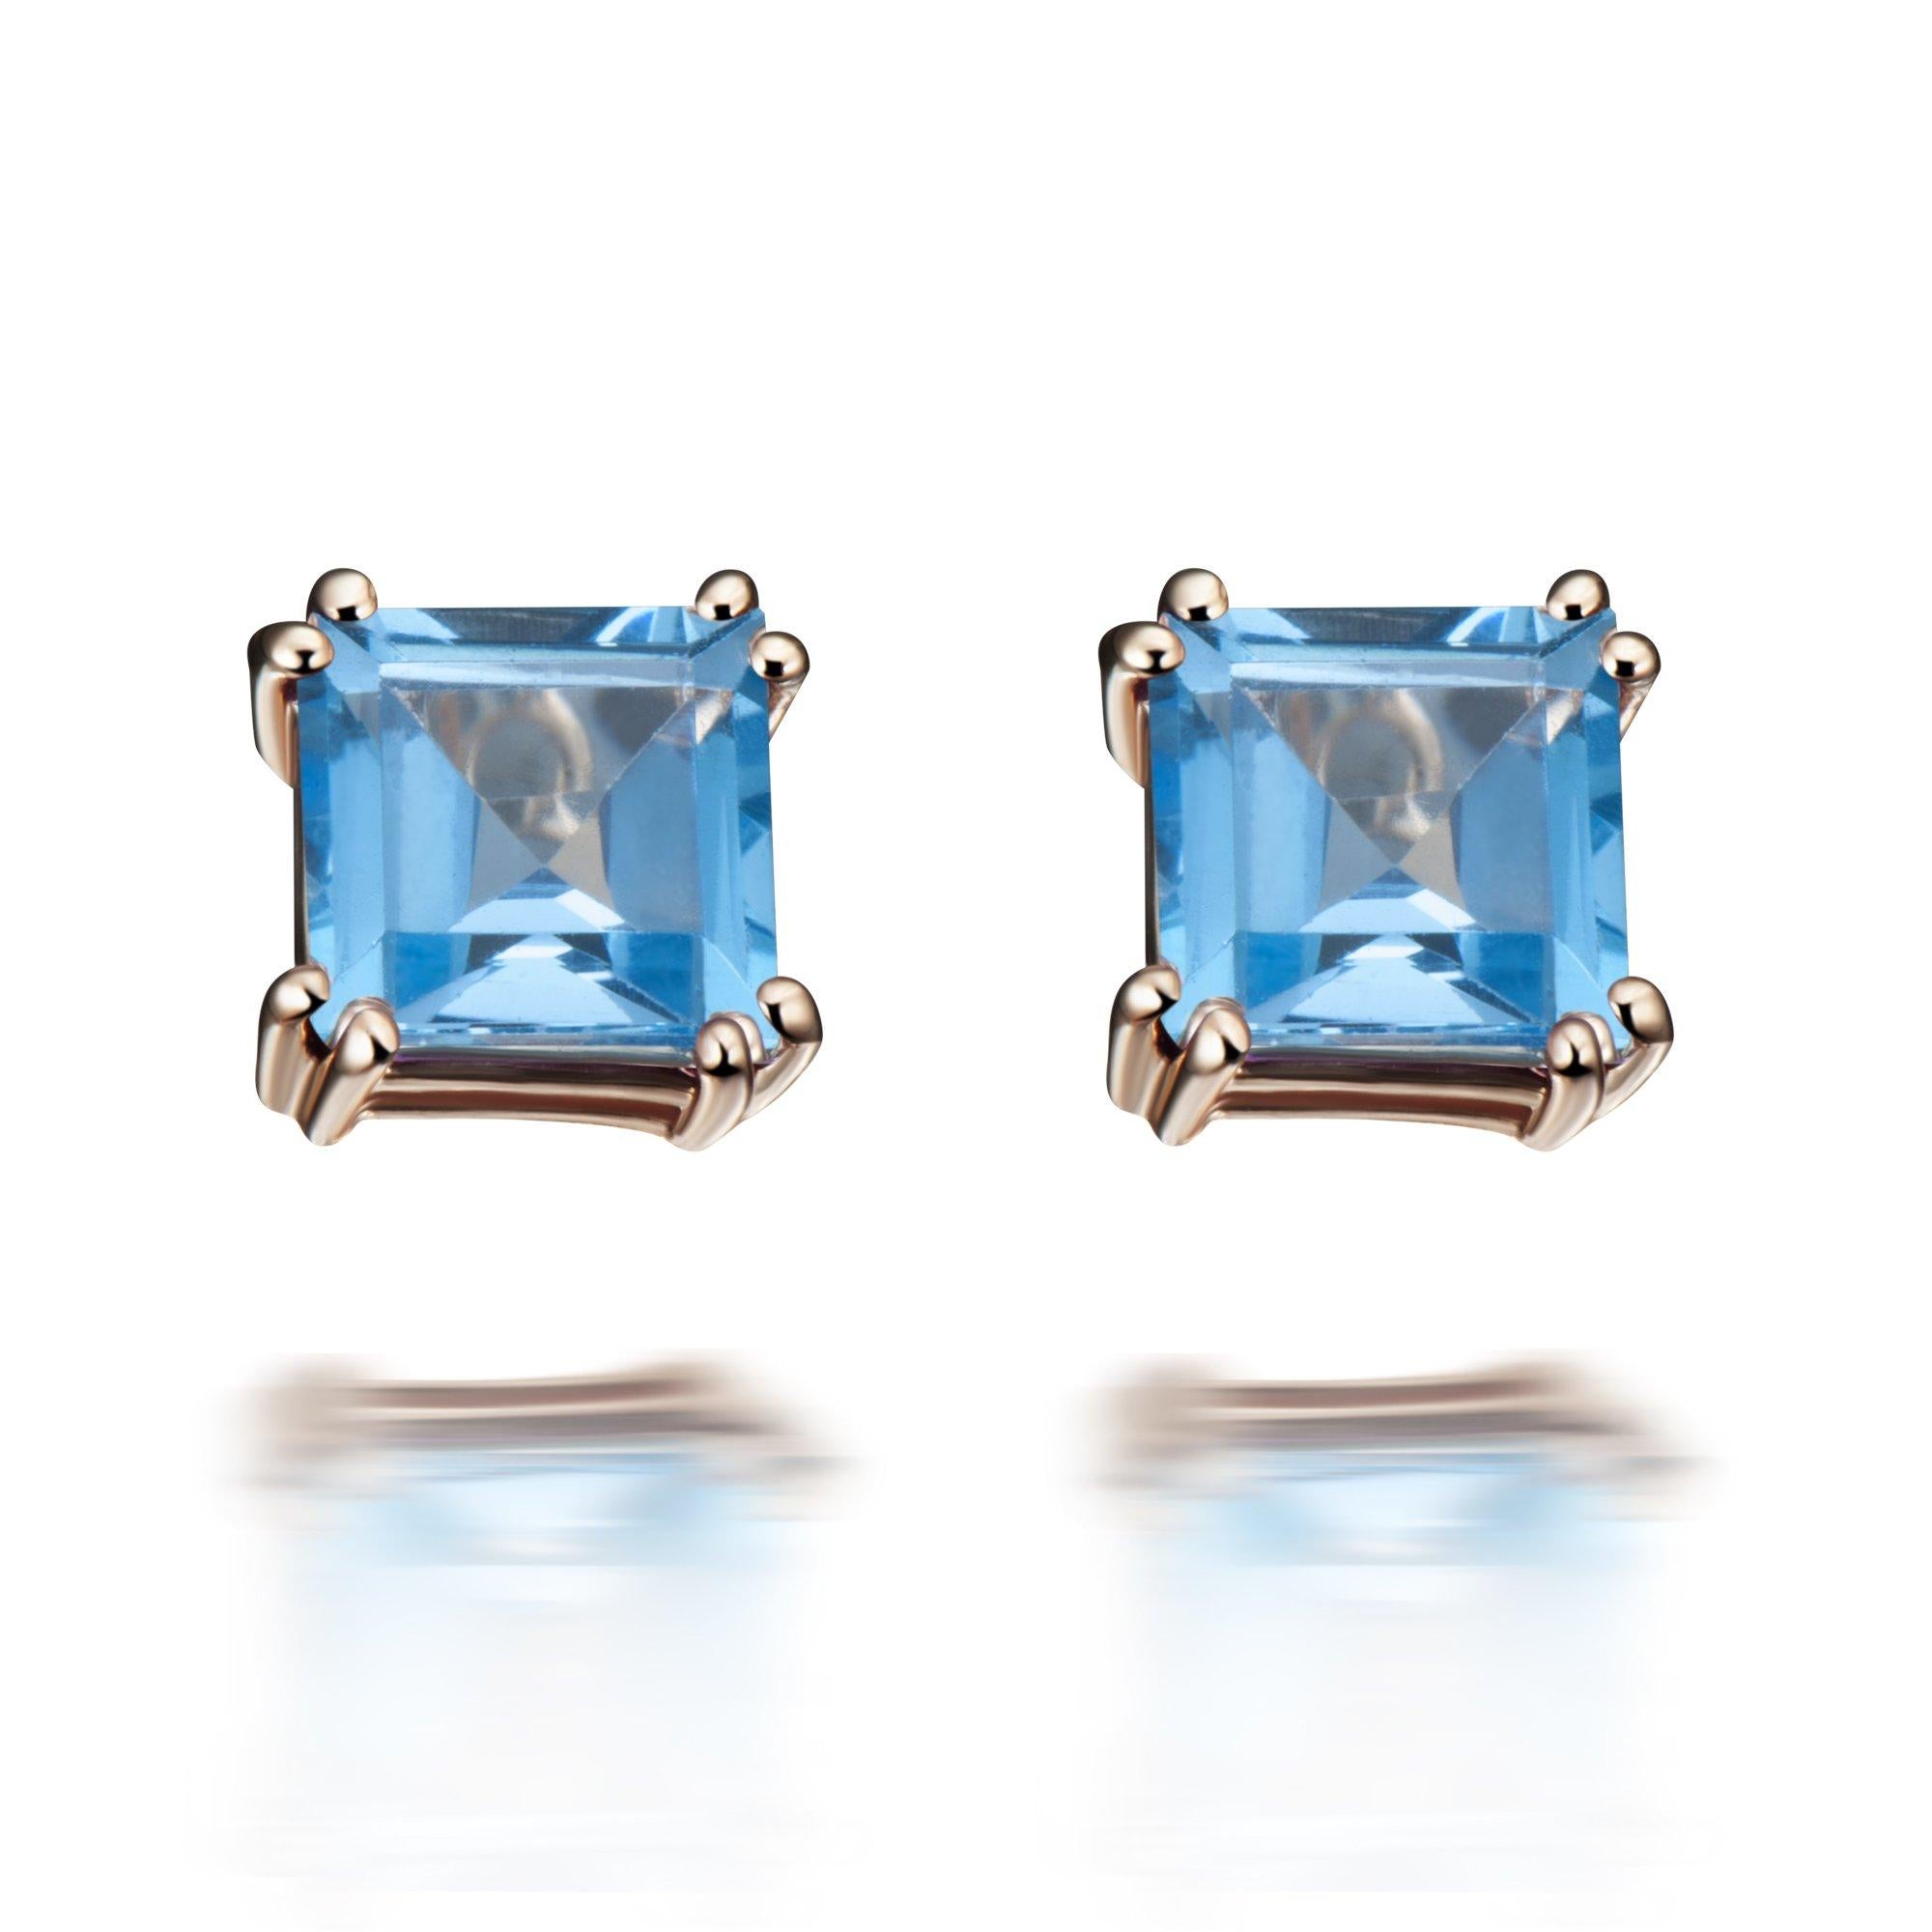 14K Rose Gold Swiss Blue Topaz Sophia Stud Earrings and Marilyn Gem Bar Earring Extenders
Weight: 3.77 grams.
Gemstone Carats: 10.40 ct.
Hestia Jewels

Unique and modern gemstone drop earrings, ideal for everyday, evening, or bridal and alternative